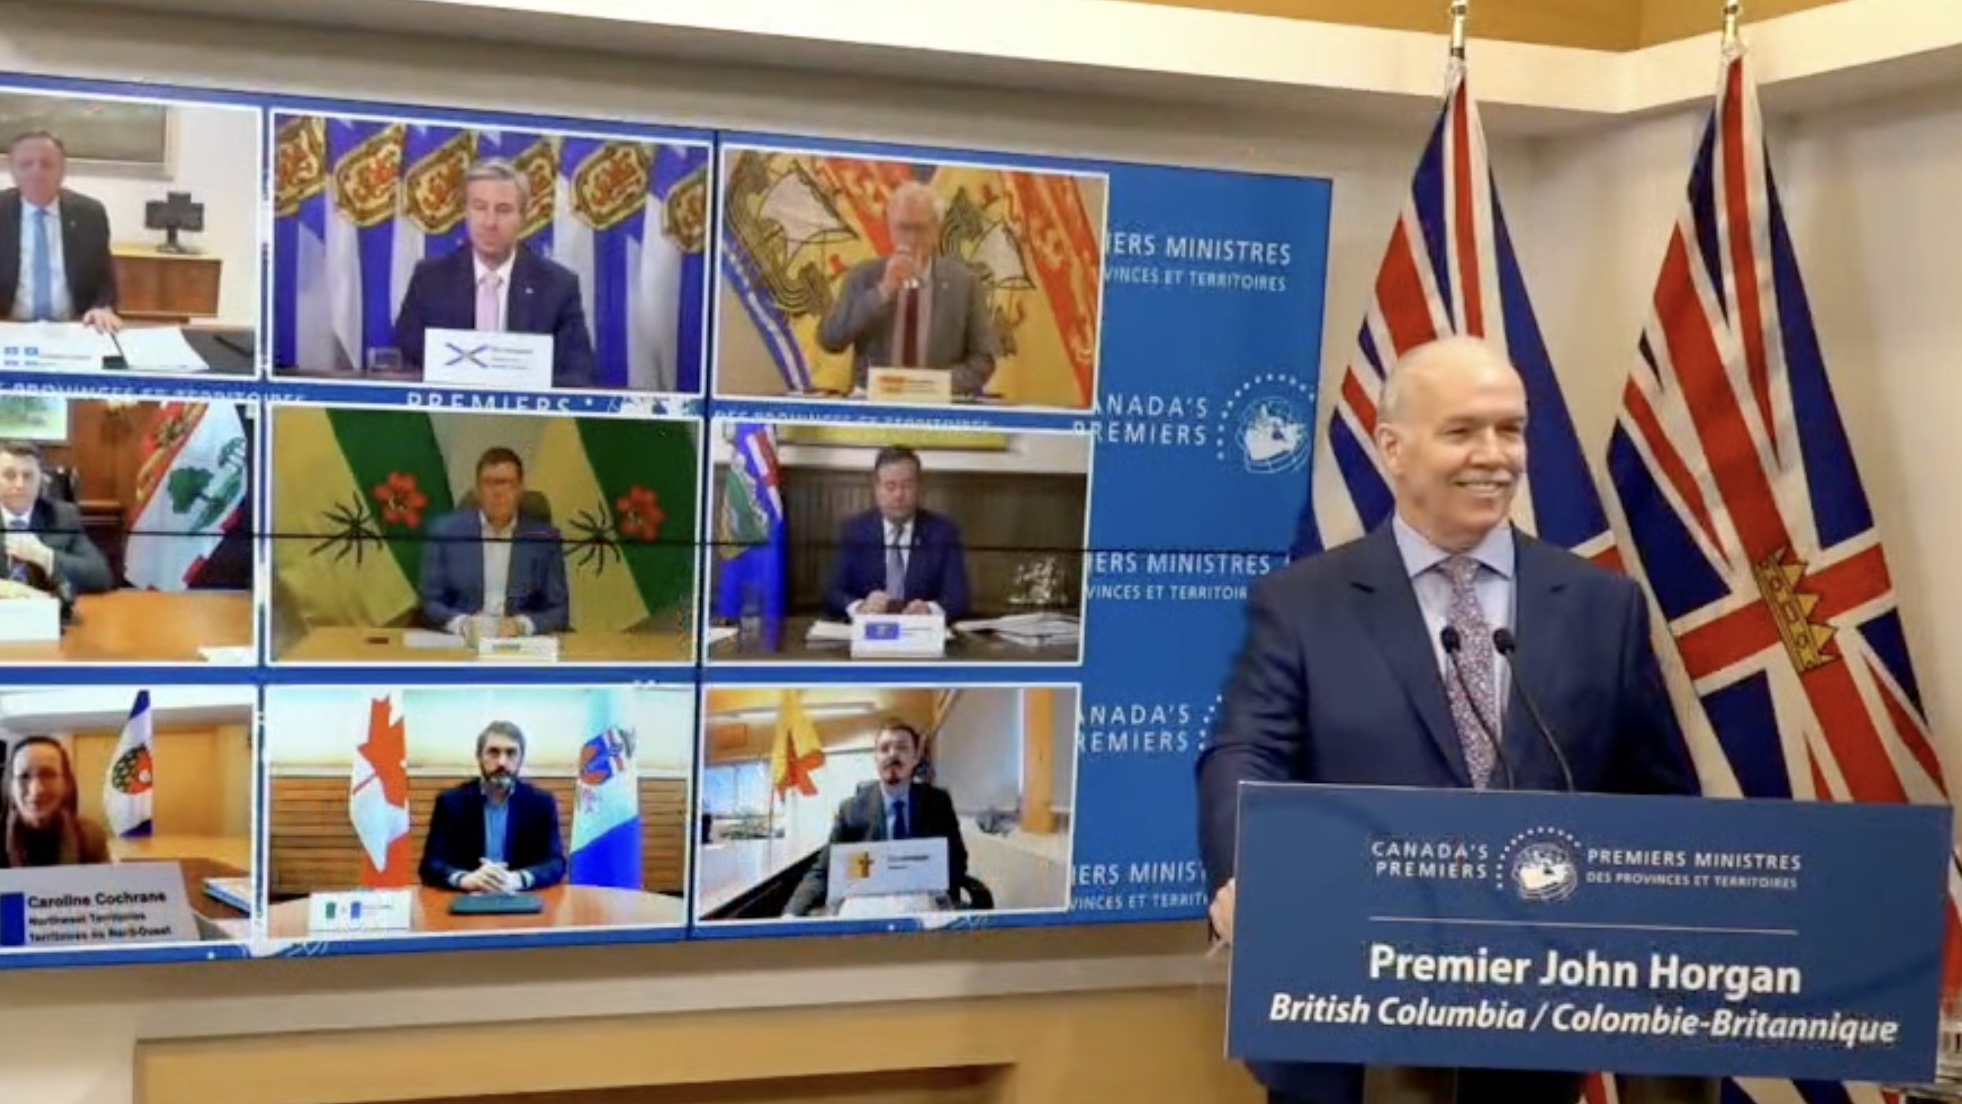 British Columbia Premier John Horgan chaired a news conference of Canada’s Premiers focused on health. Photo: Josefa Cameron